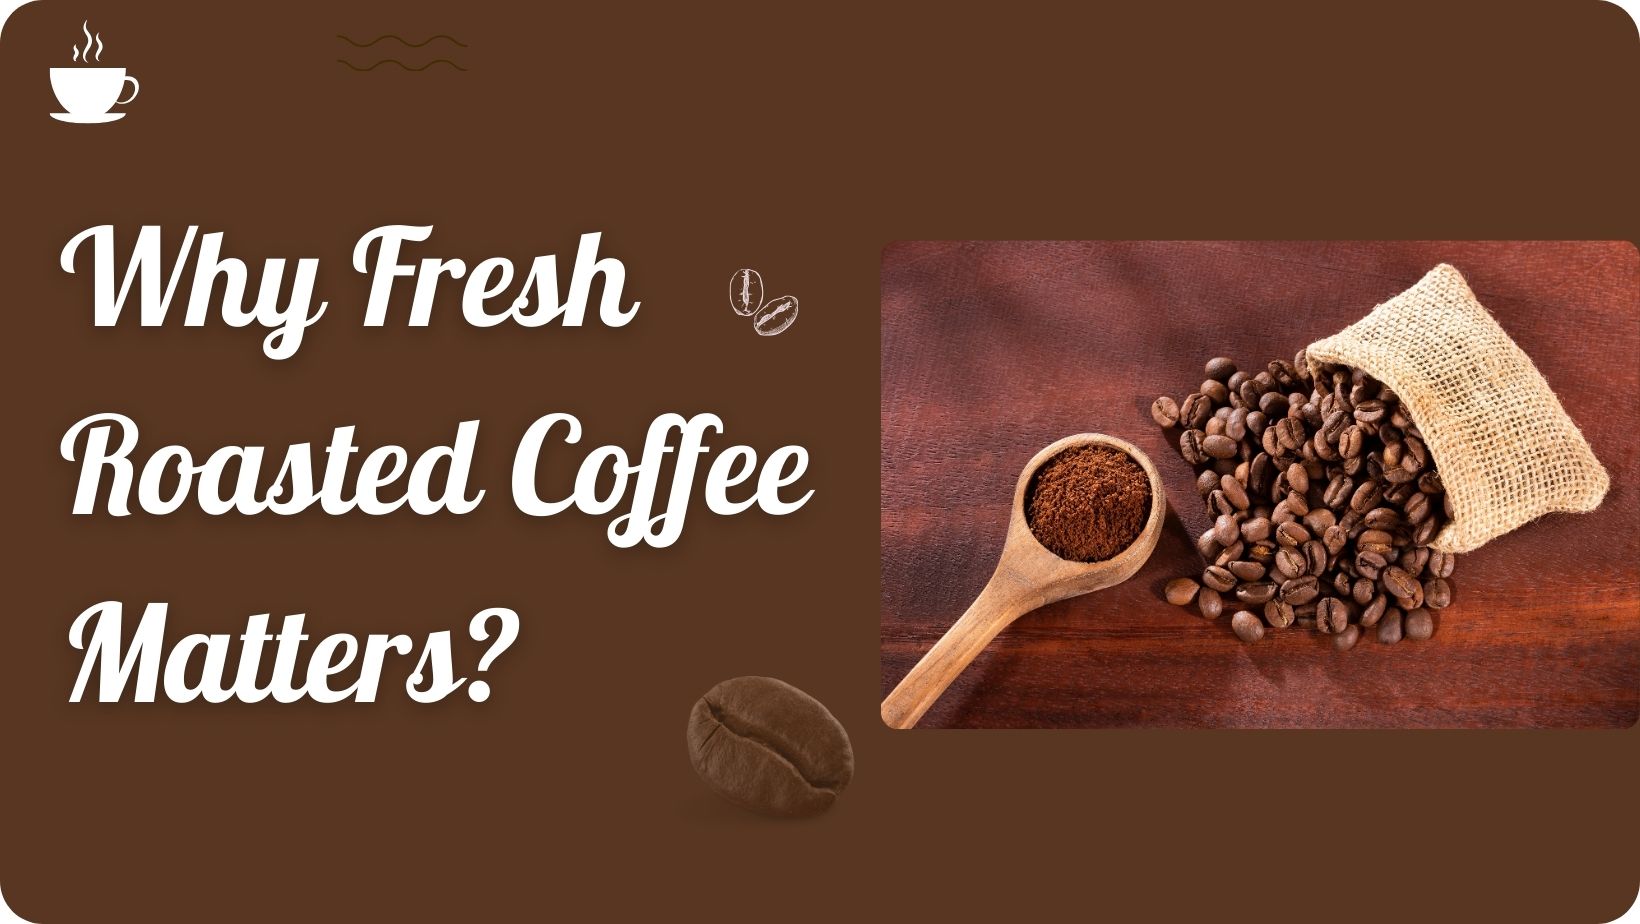 Why Fresh Roasted Coffee Matters?